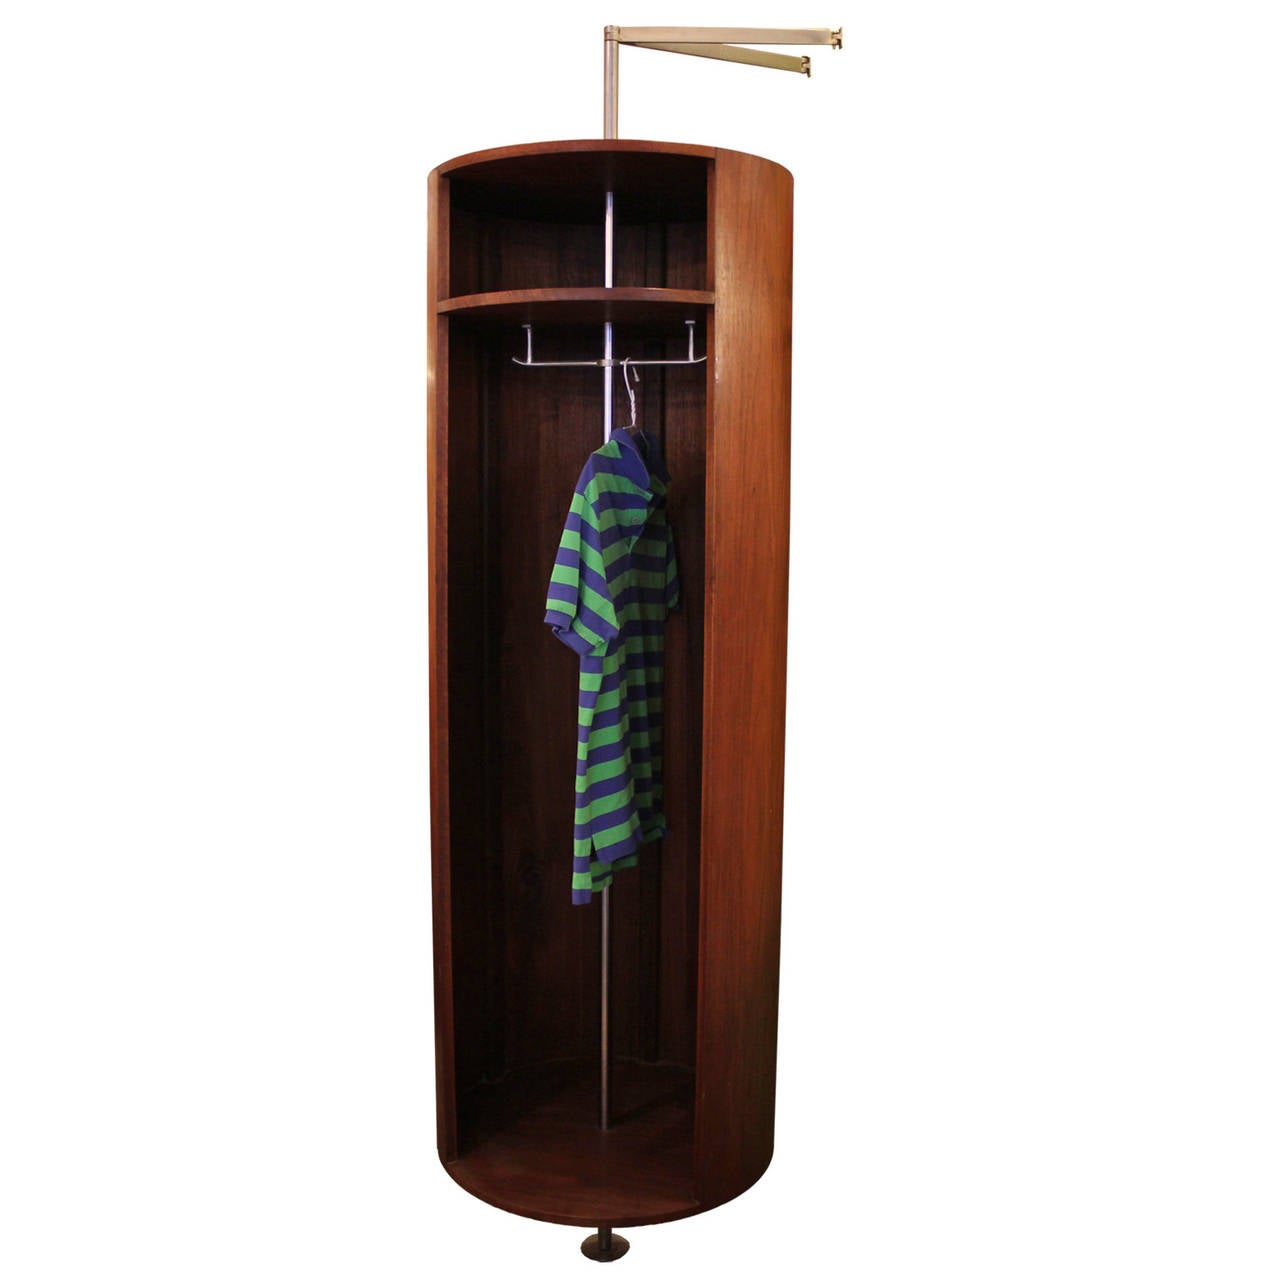 Fabulous cylindrical spinning walnut wardrobe closet. Mounts to wall and is supported by a pole. The inside reveals a single shelf and a hanging rod. A true statement piece.